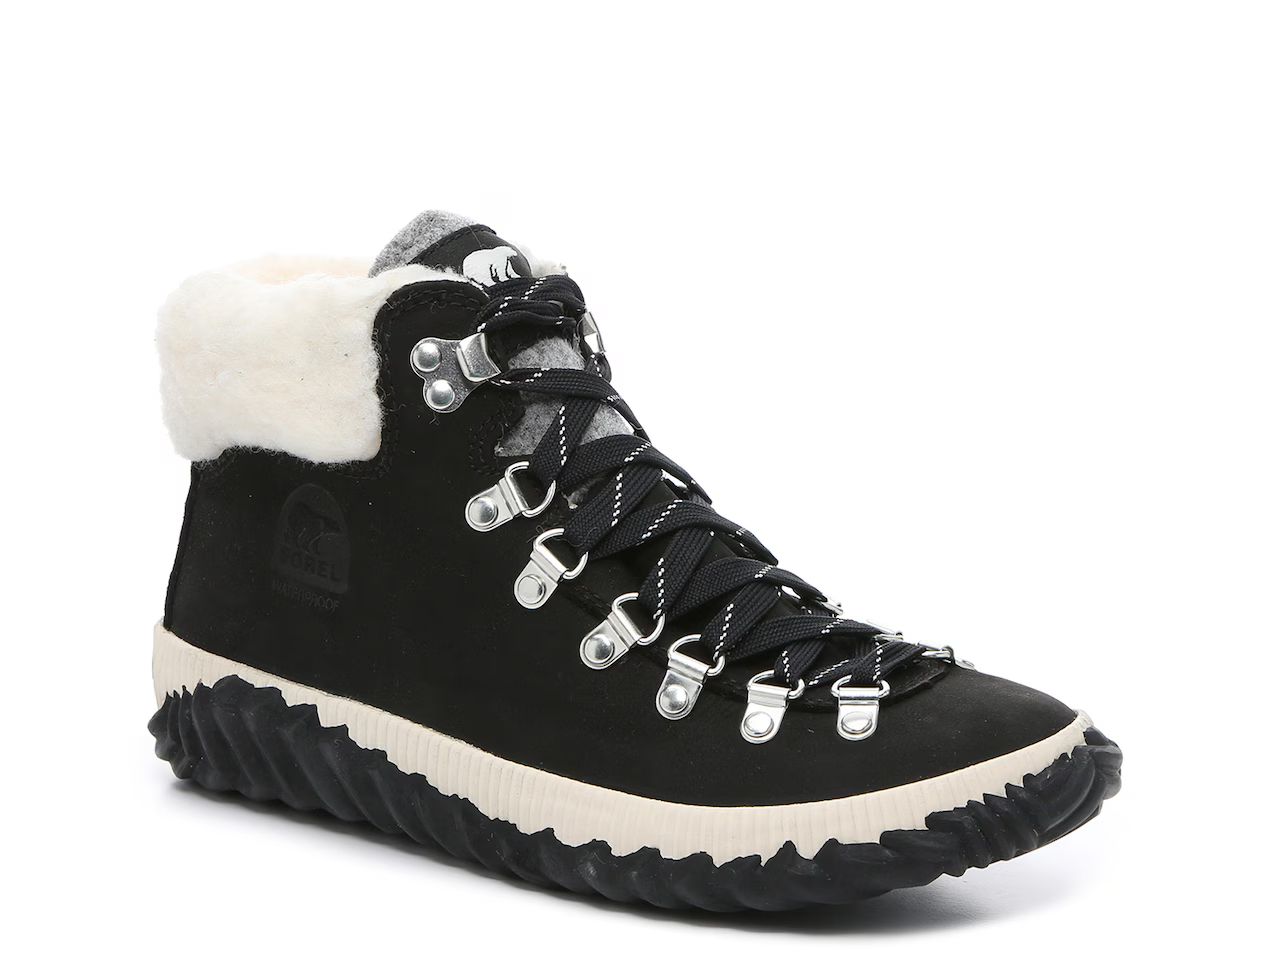 Sorel Out N About Plus Conquest Snow Boot | DSW